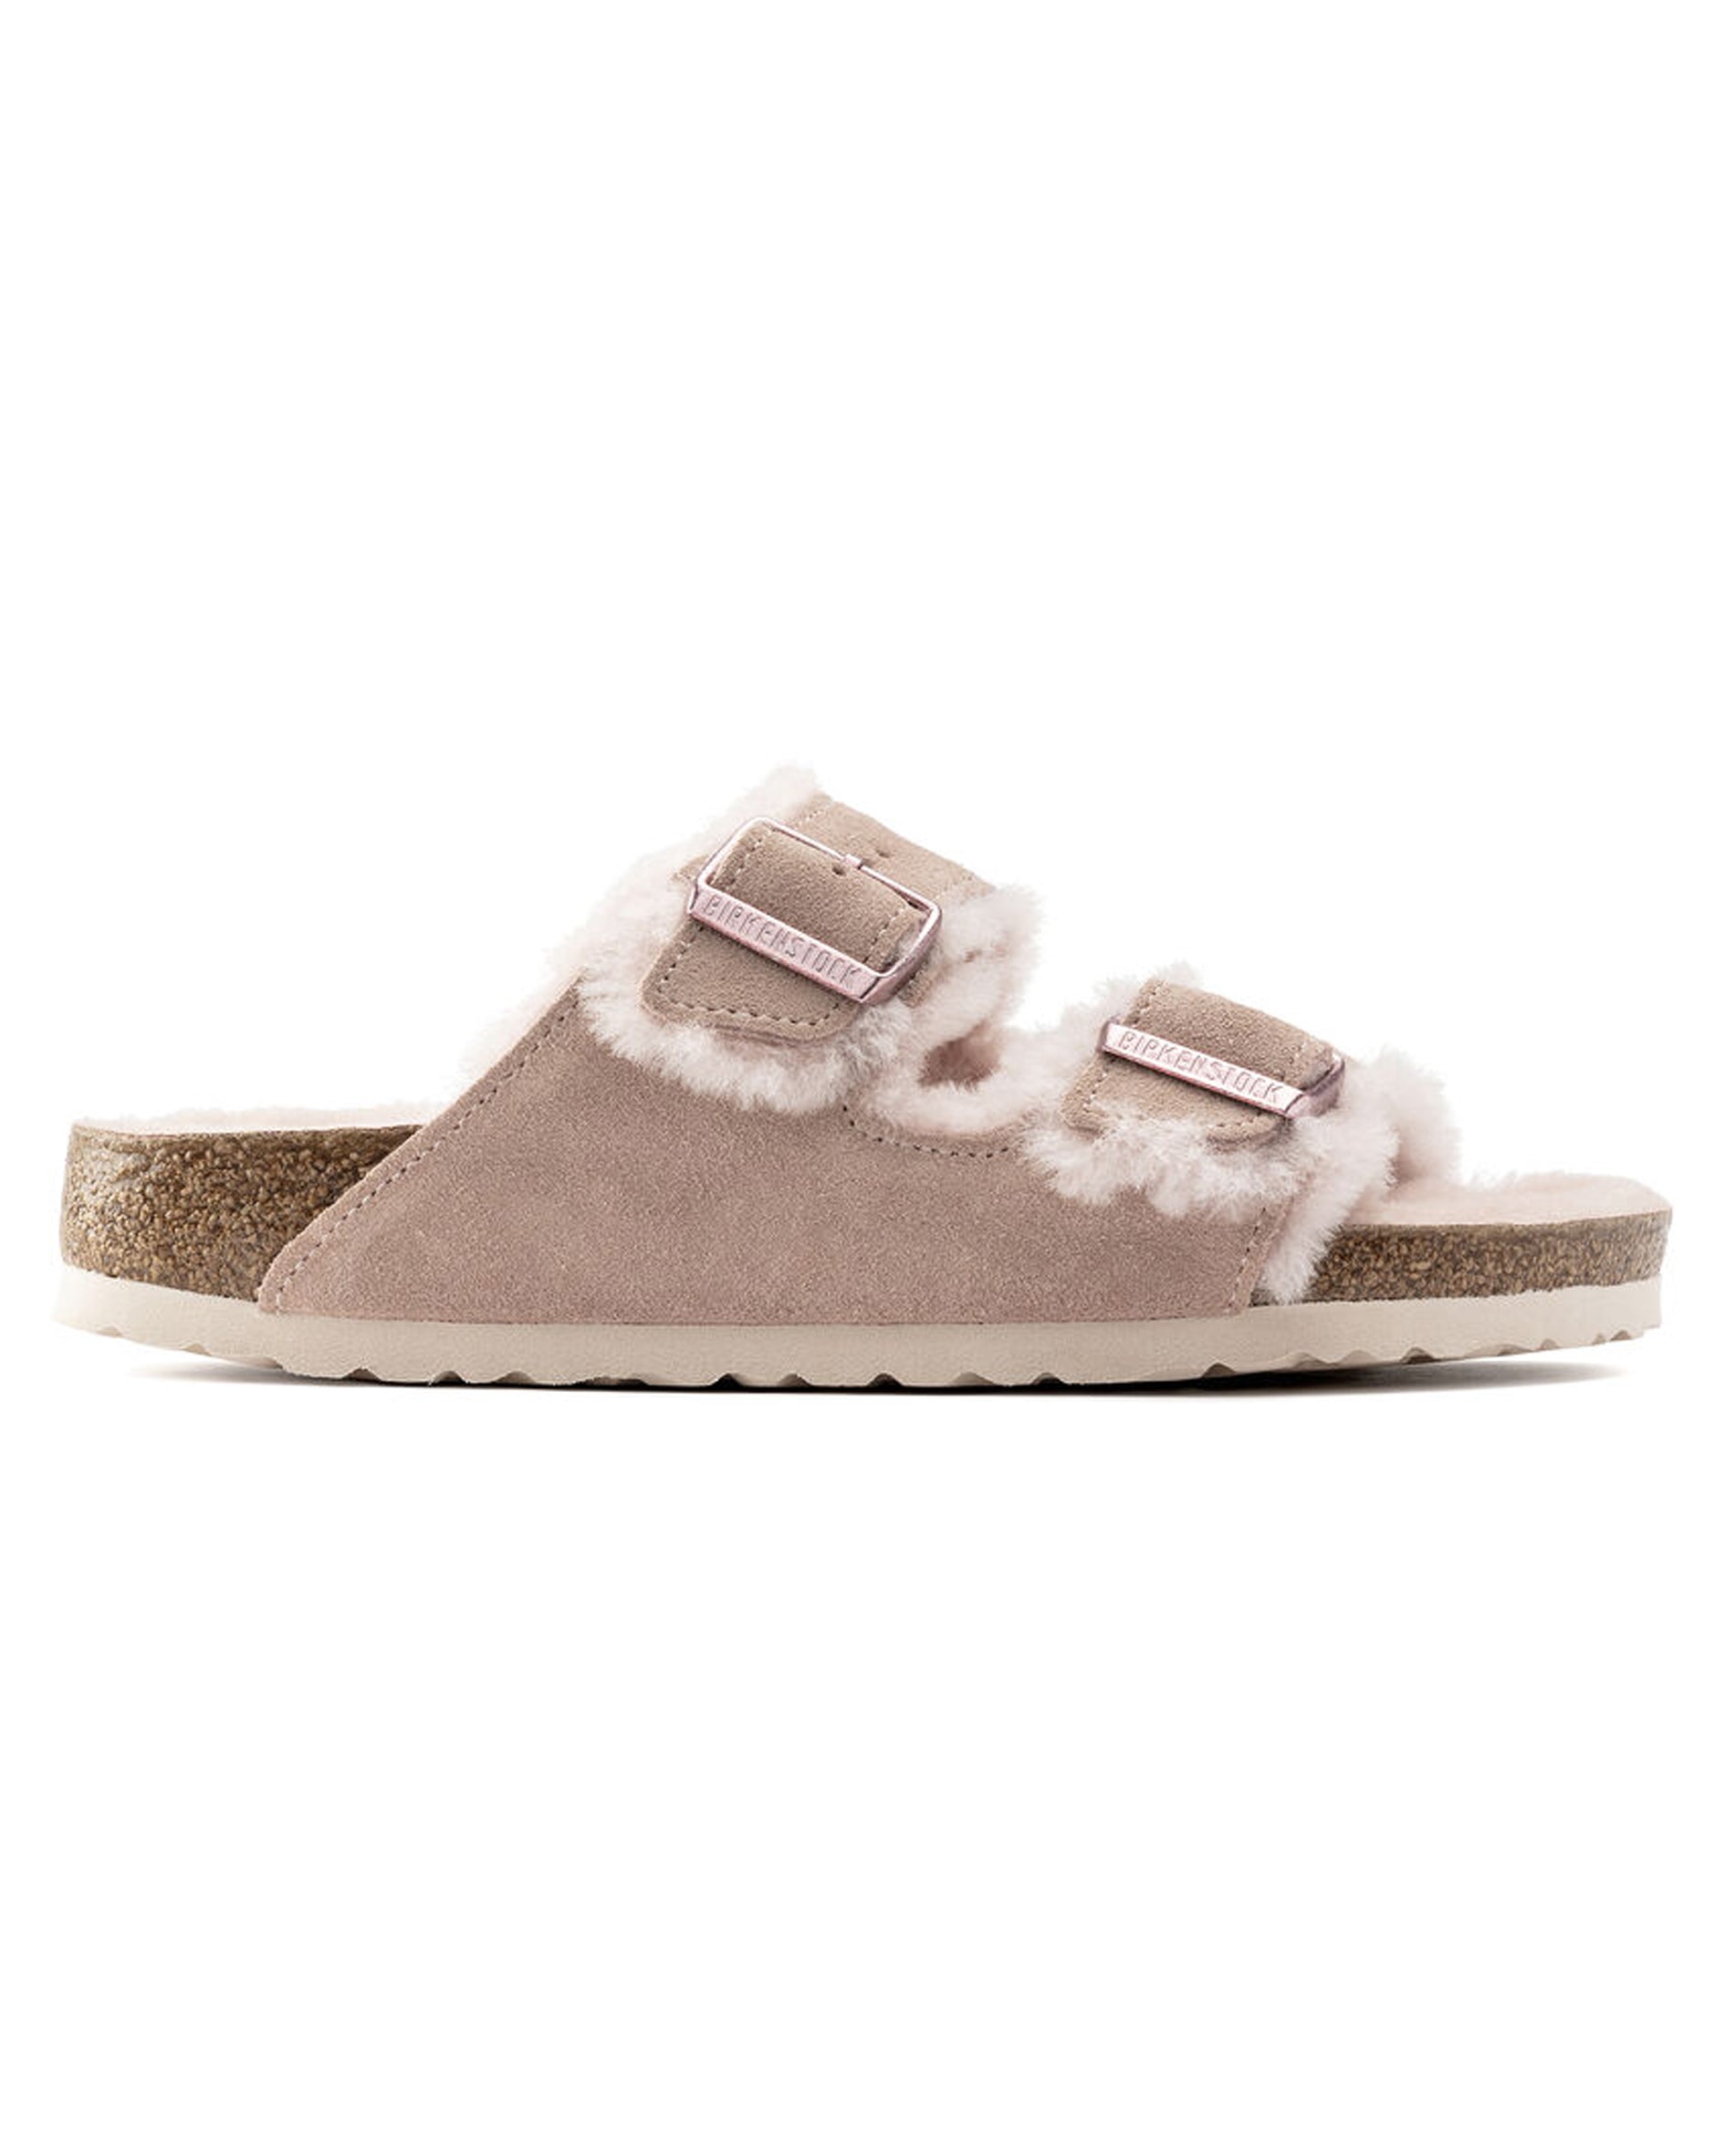 Arizona Shearling Light Rose Suede Leather Sandals